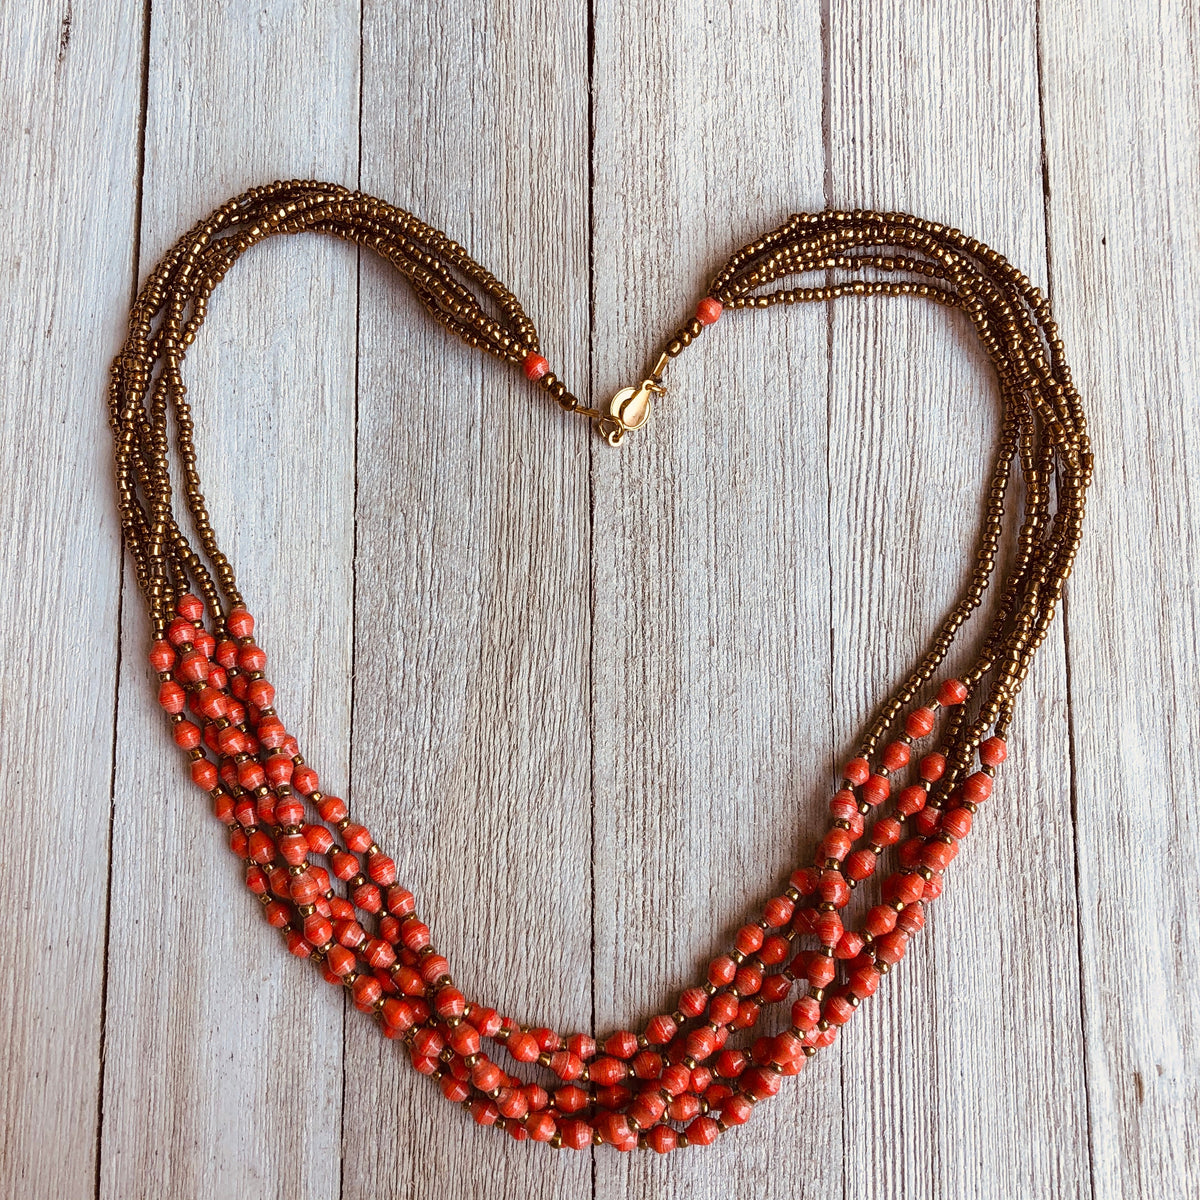 Musana Handmade Multi Strand Beaded Necklace (Rustic Red with Gold Seed Beads, 6 Strands)